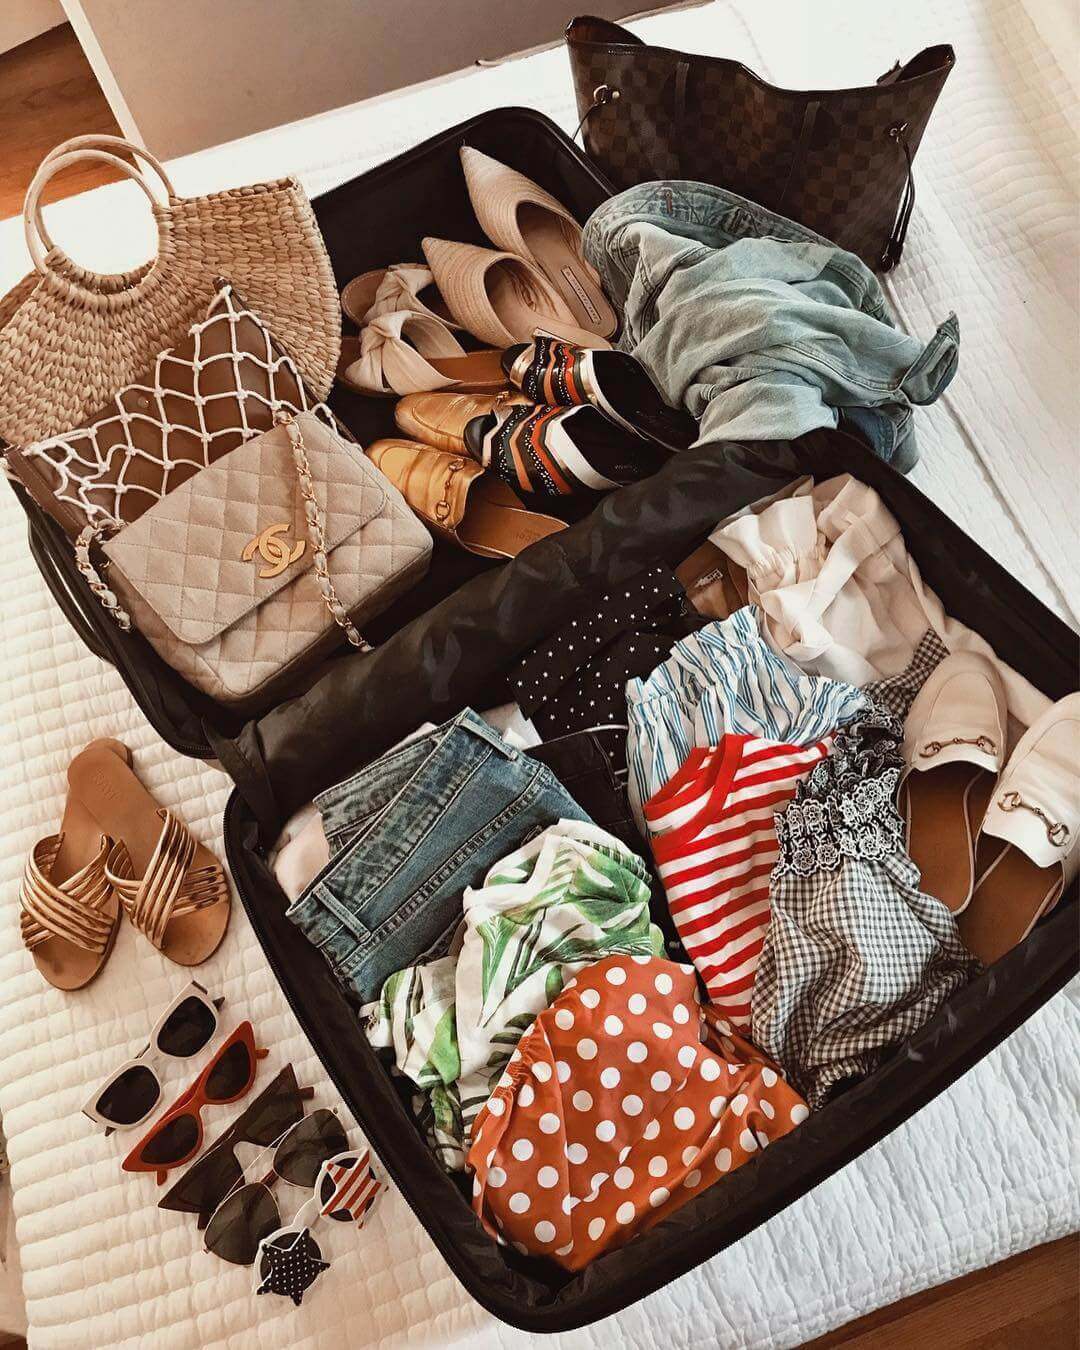 The Art of Packing Light for your upcoming trip to Europe!